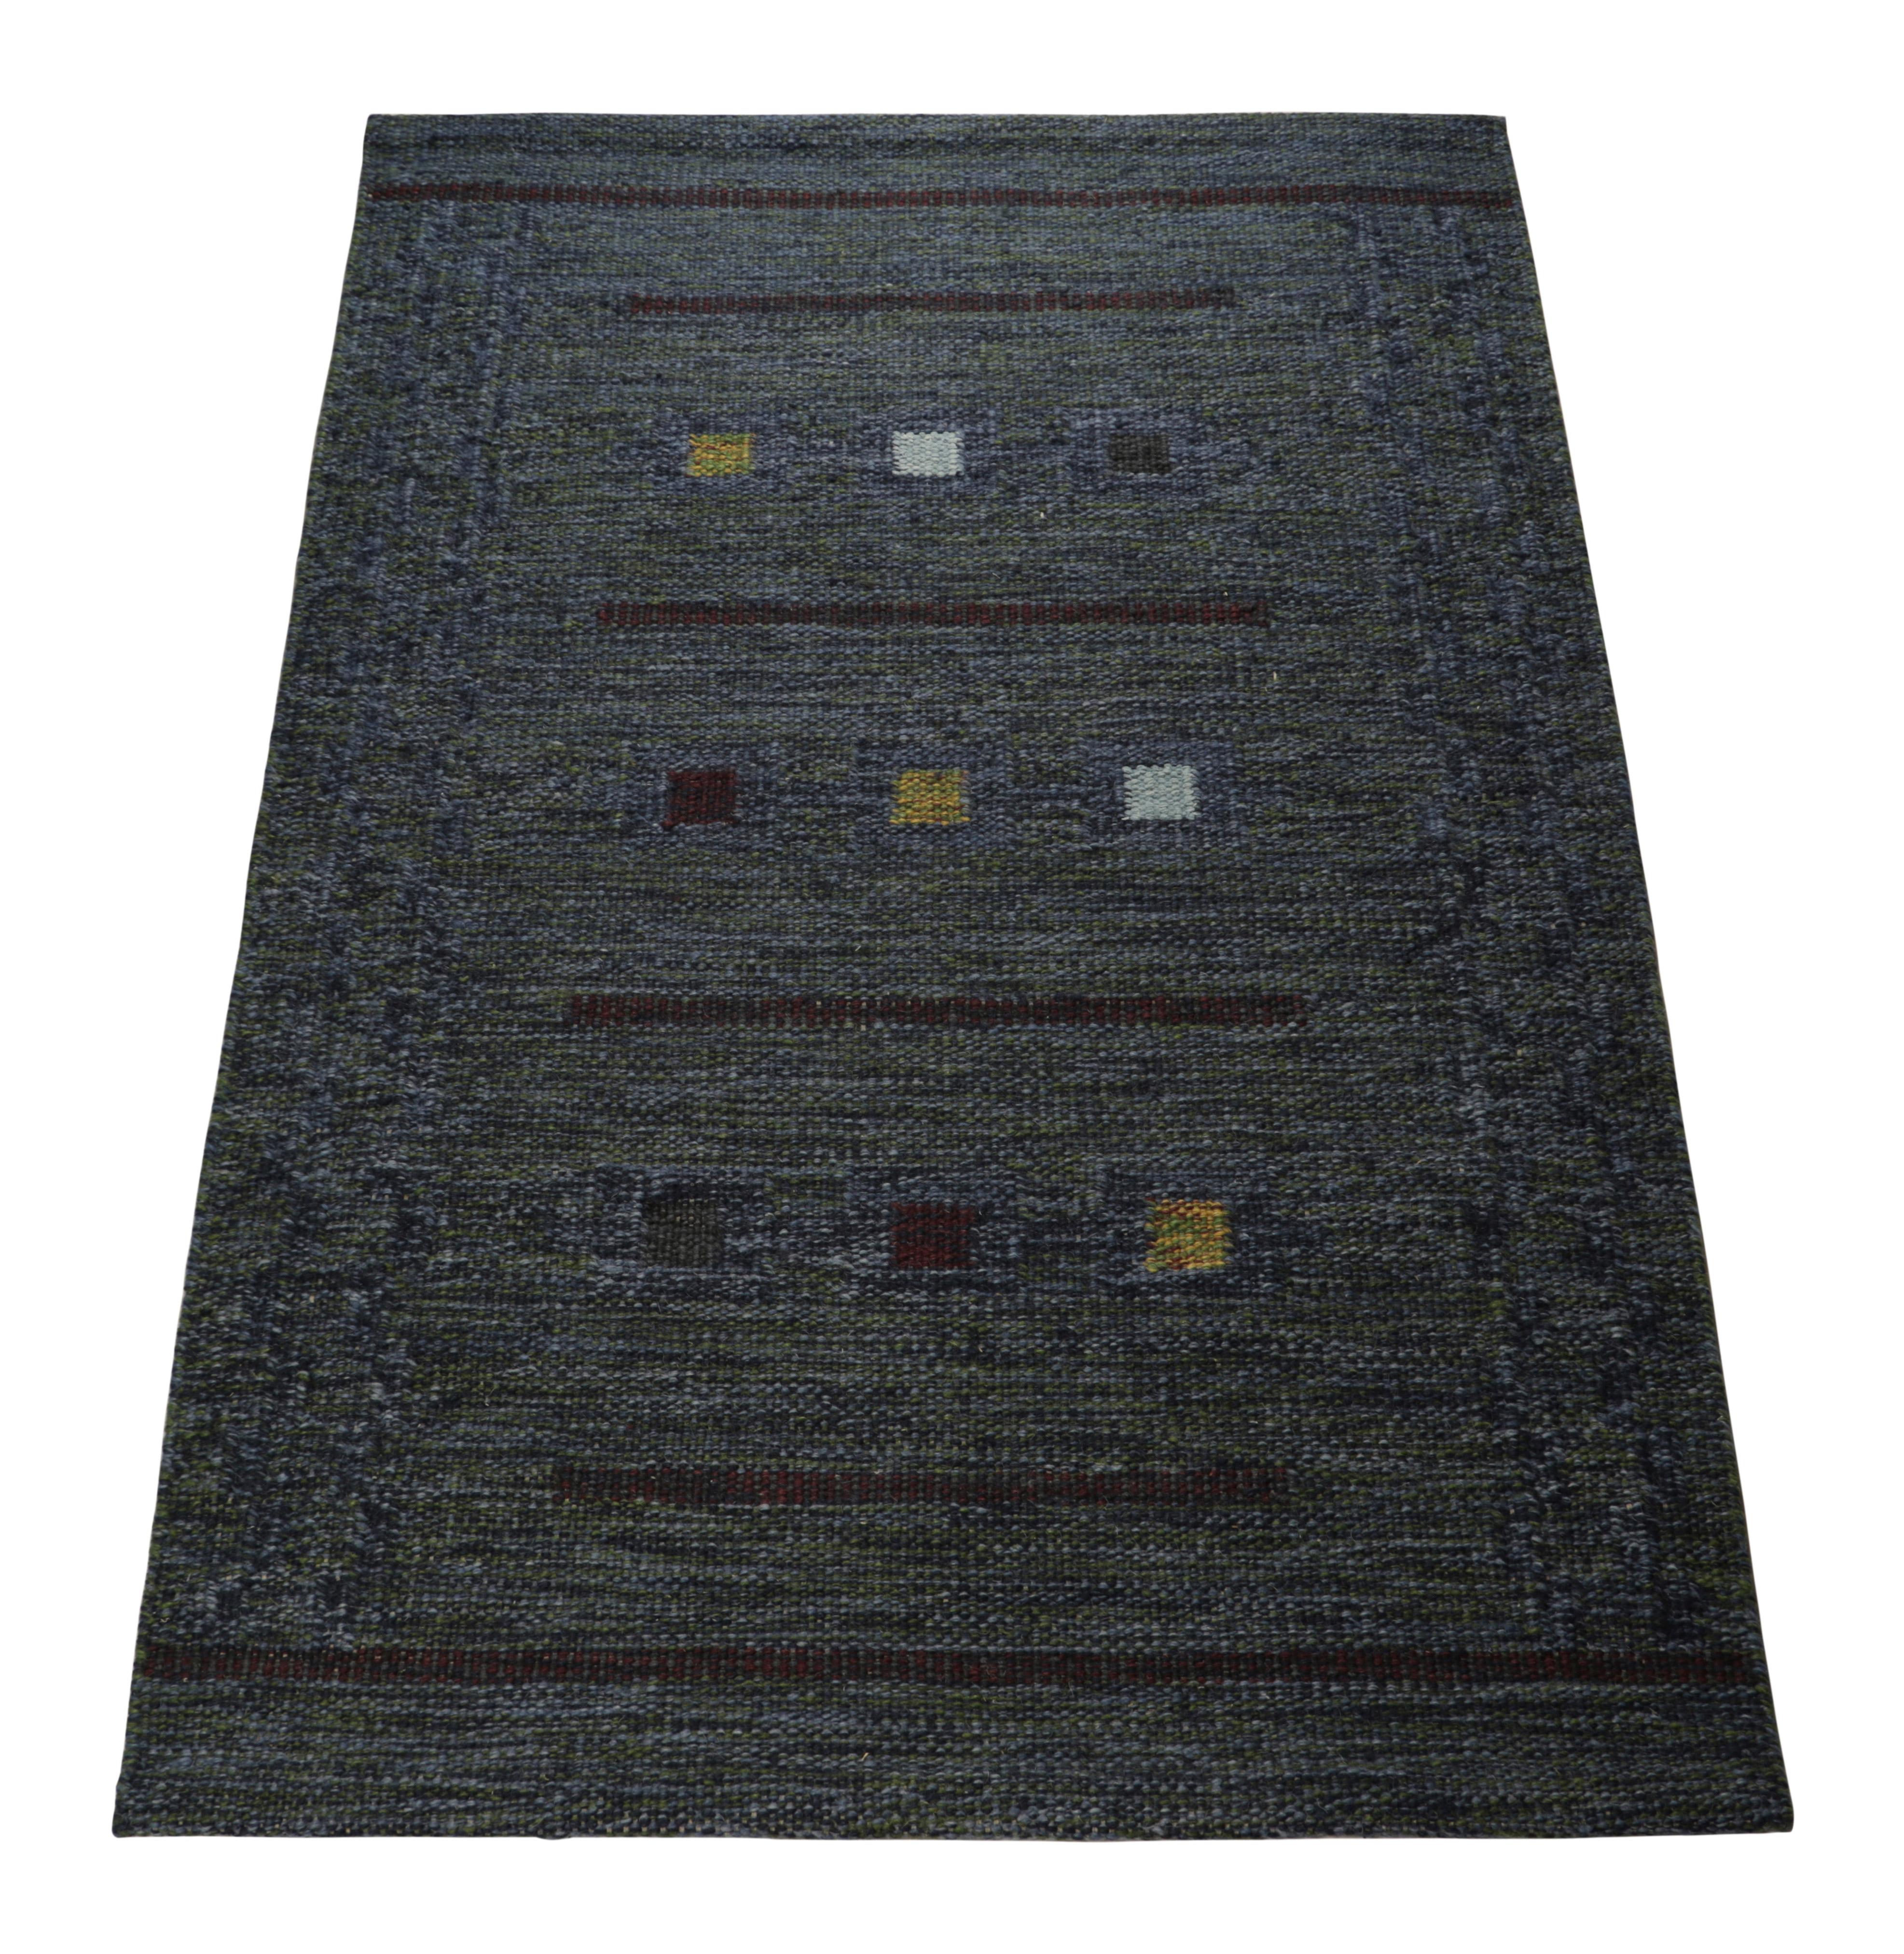 Indian Rug & Kilim’s Scandinavian Style Rug in Blue Tones, with Geometric Patterns For Sale